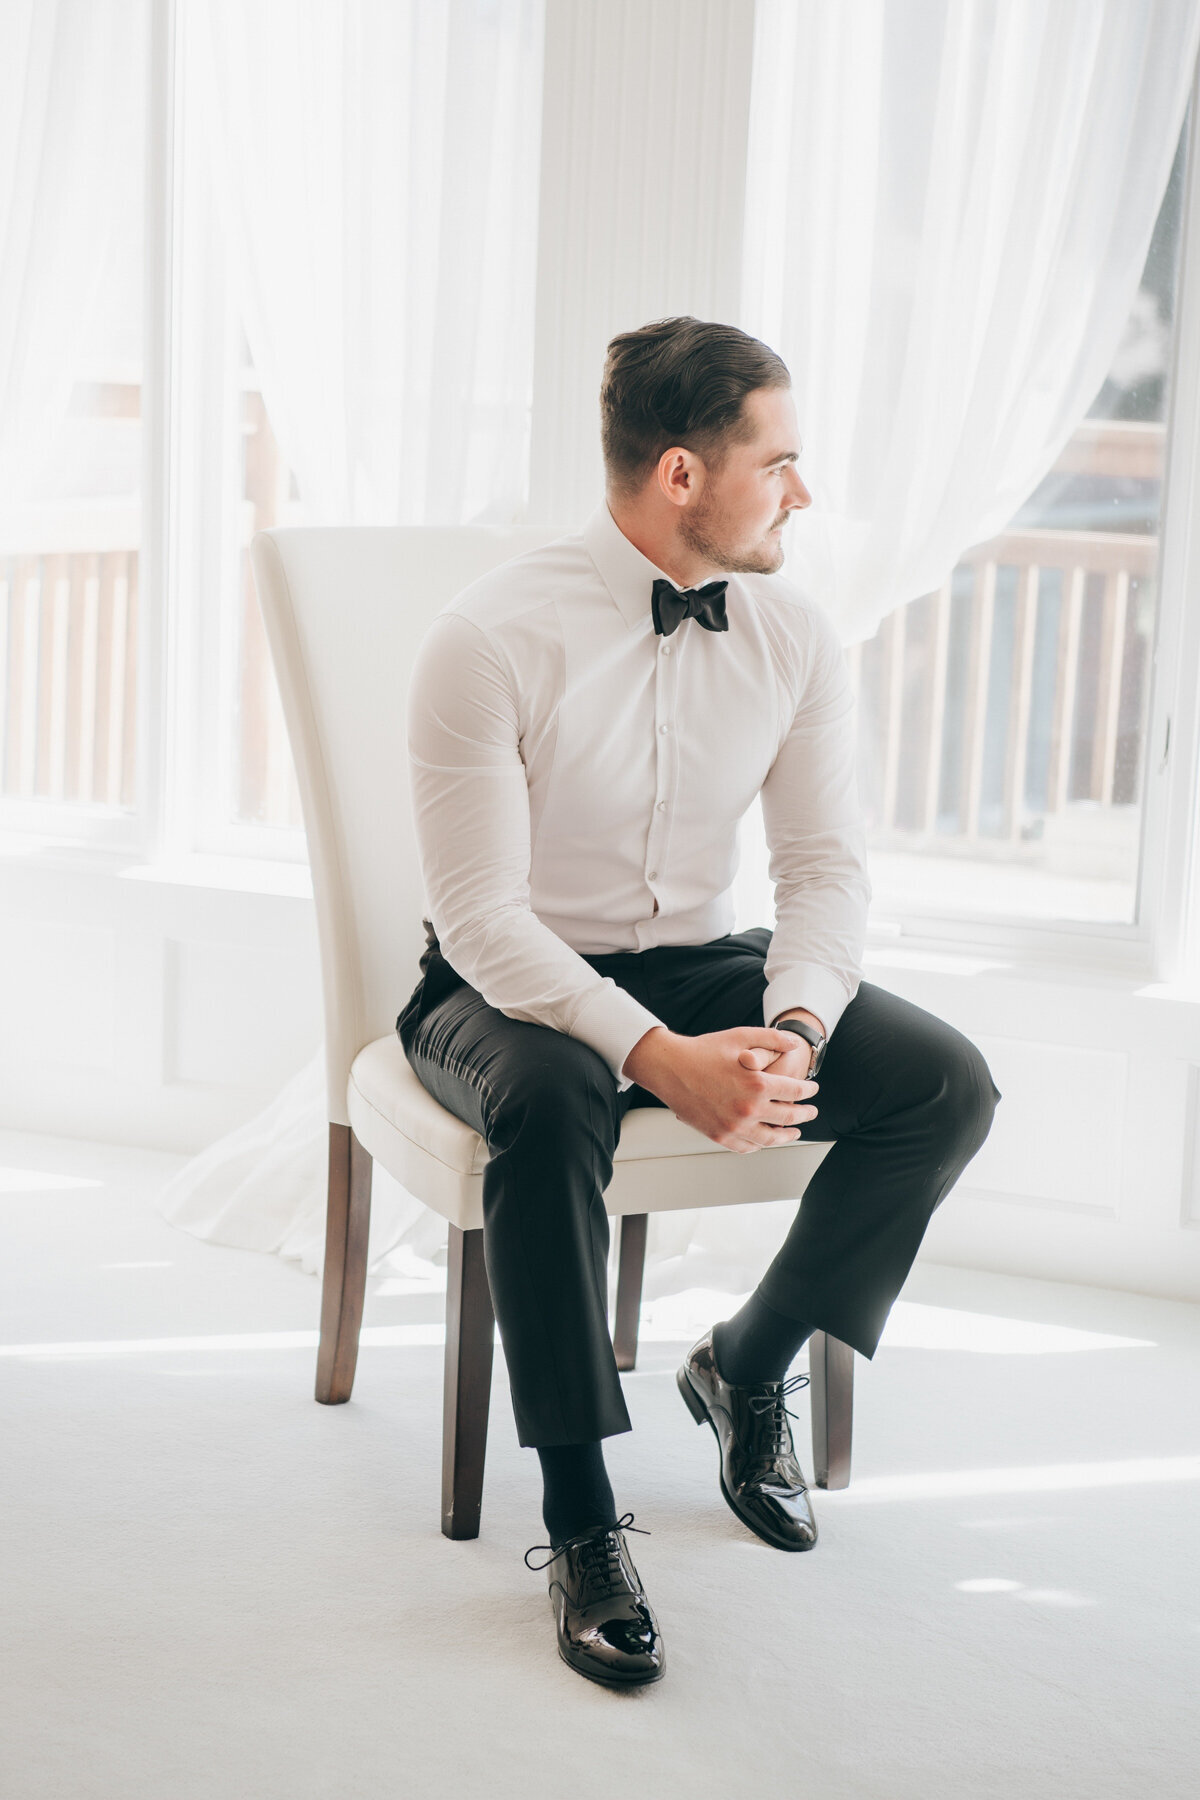 The groom in black tie attire posing for portraits on his wedding day